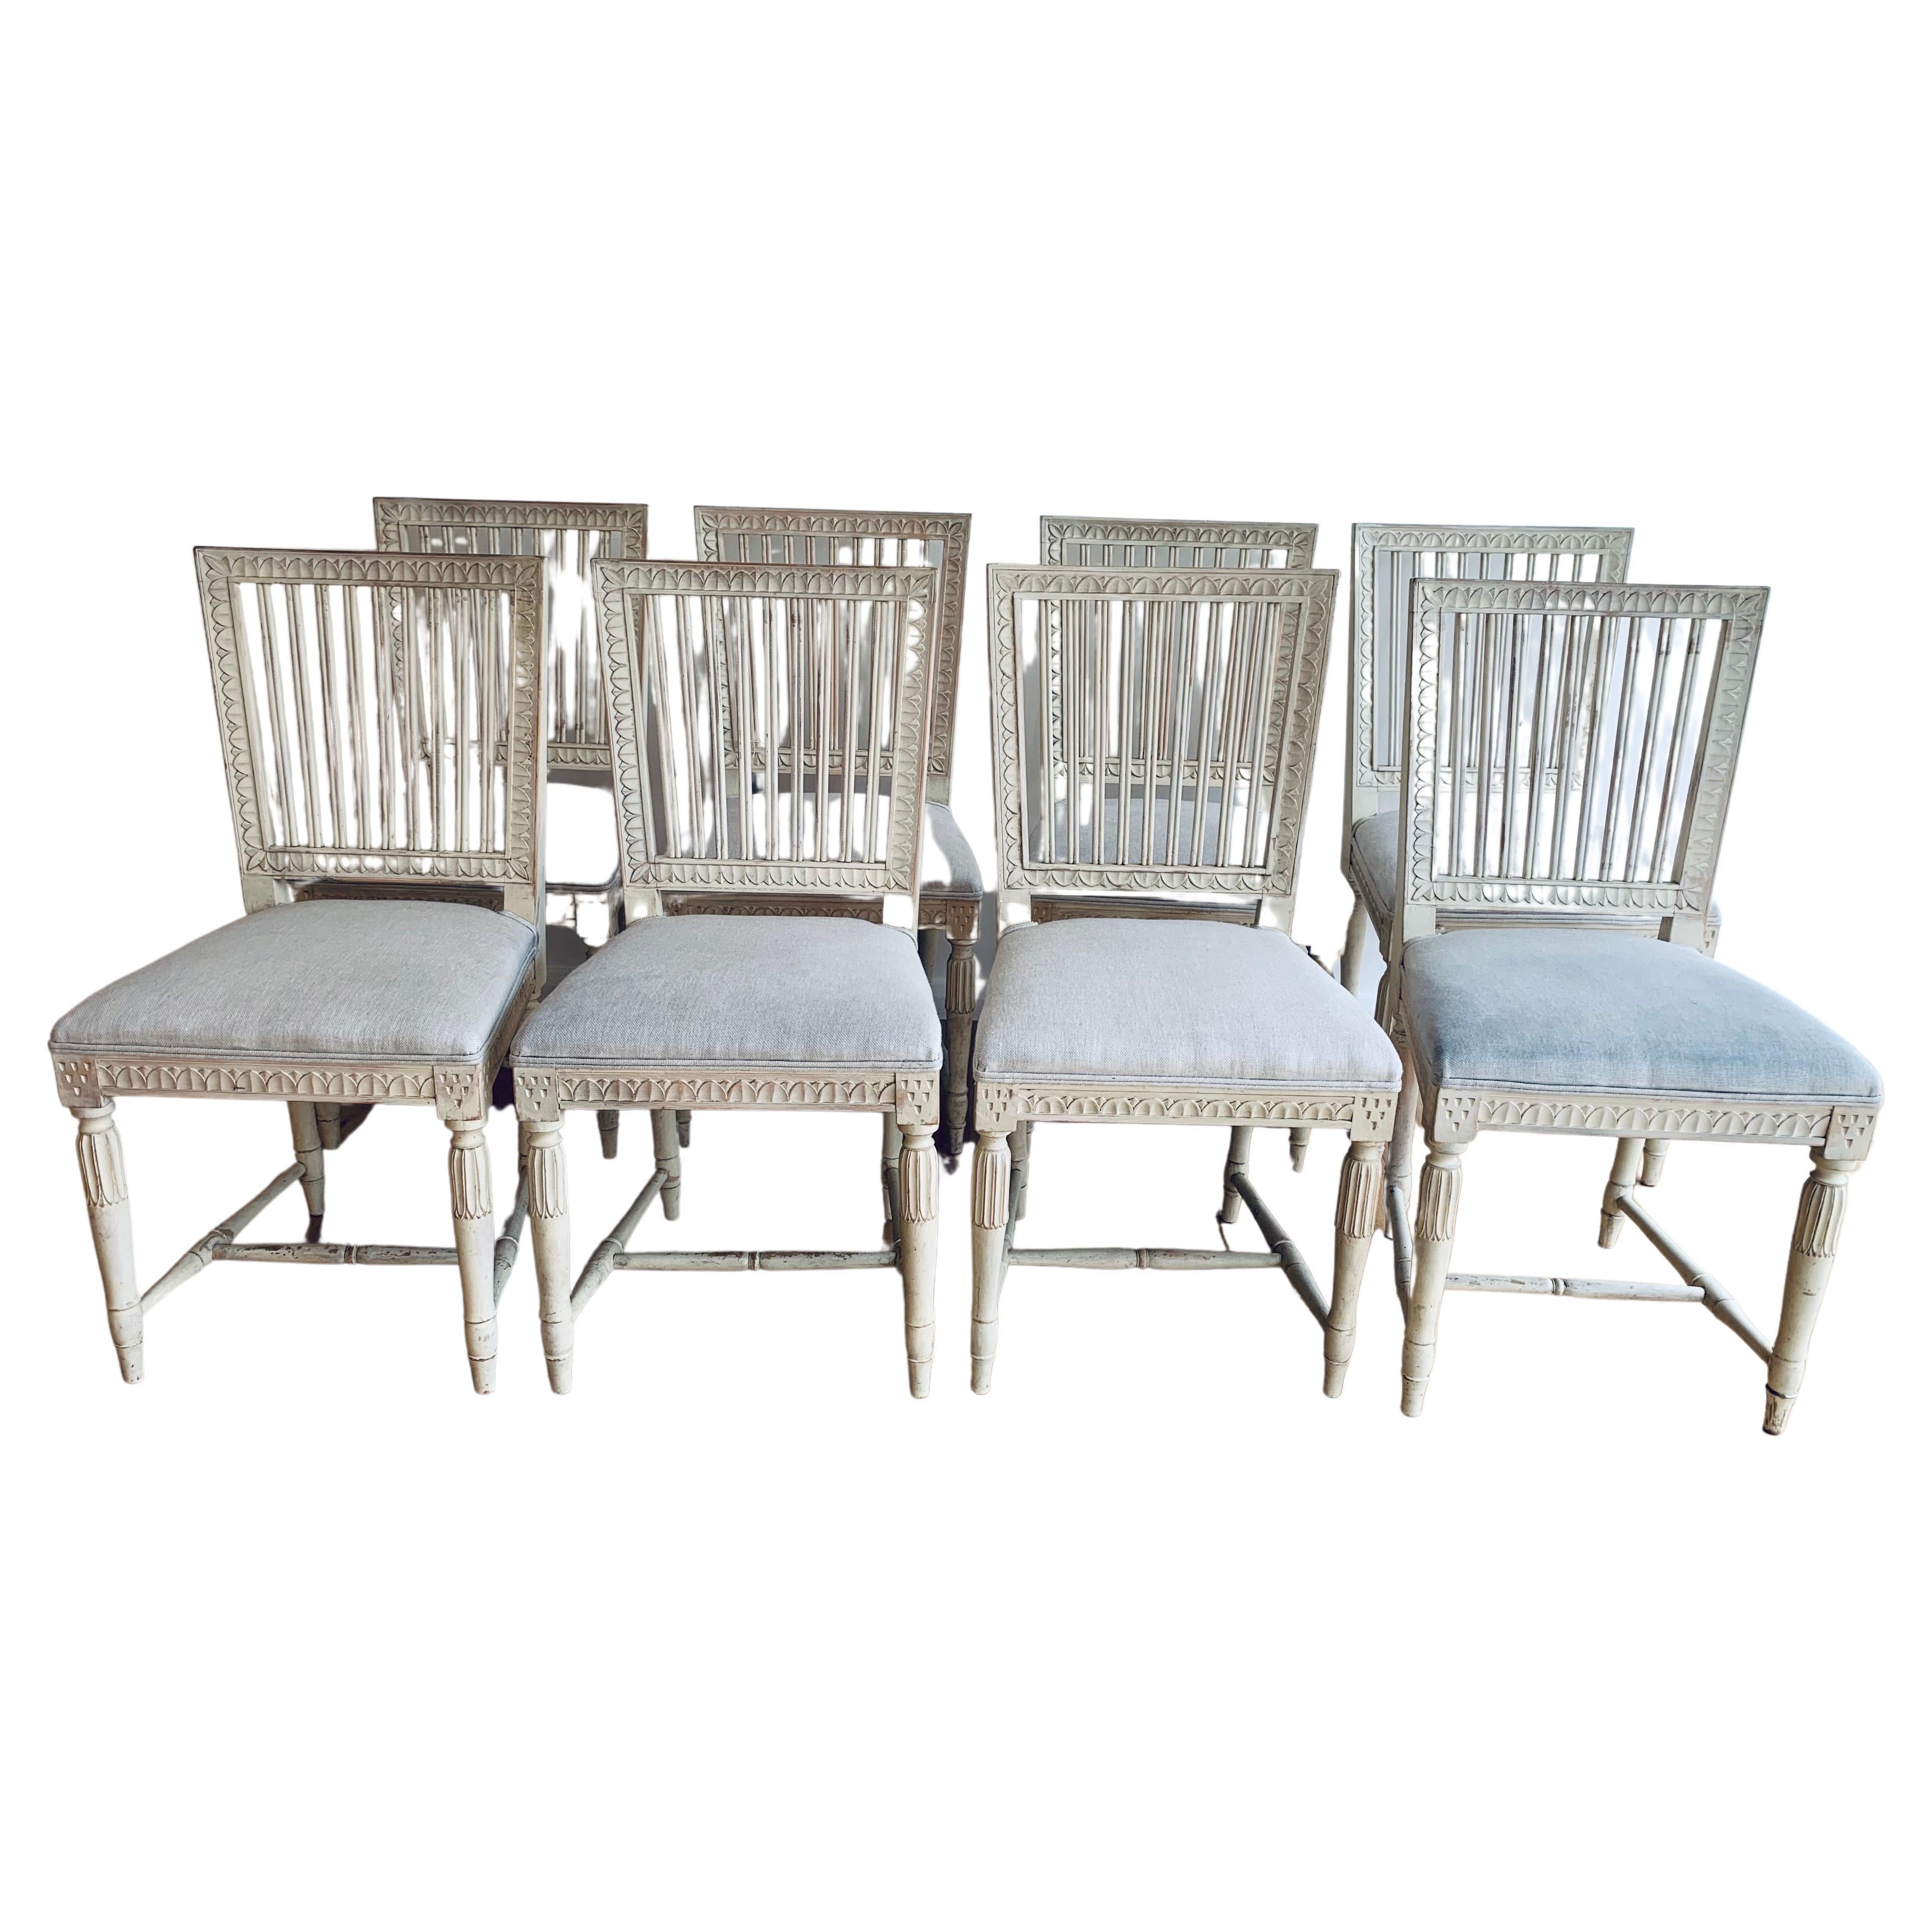 Set of 8 1930s Swedish Stick Back Painted Dining Chairs 9